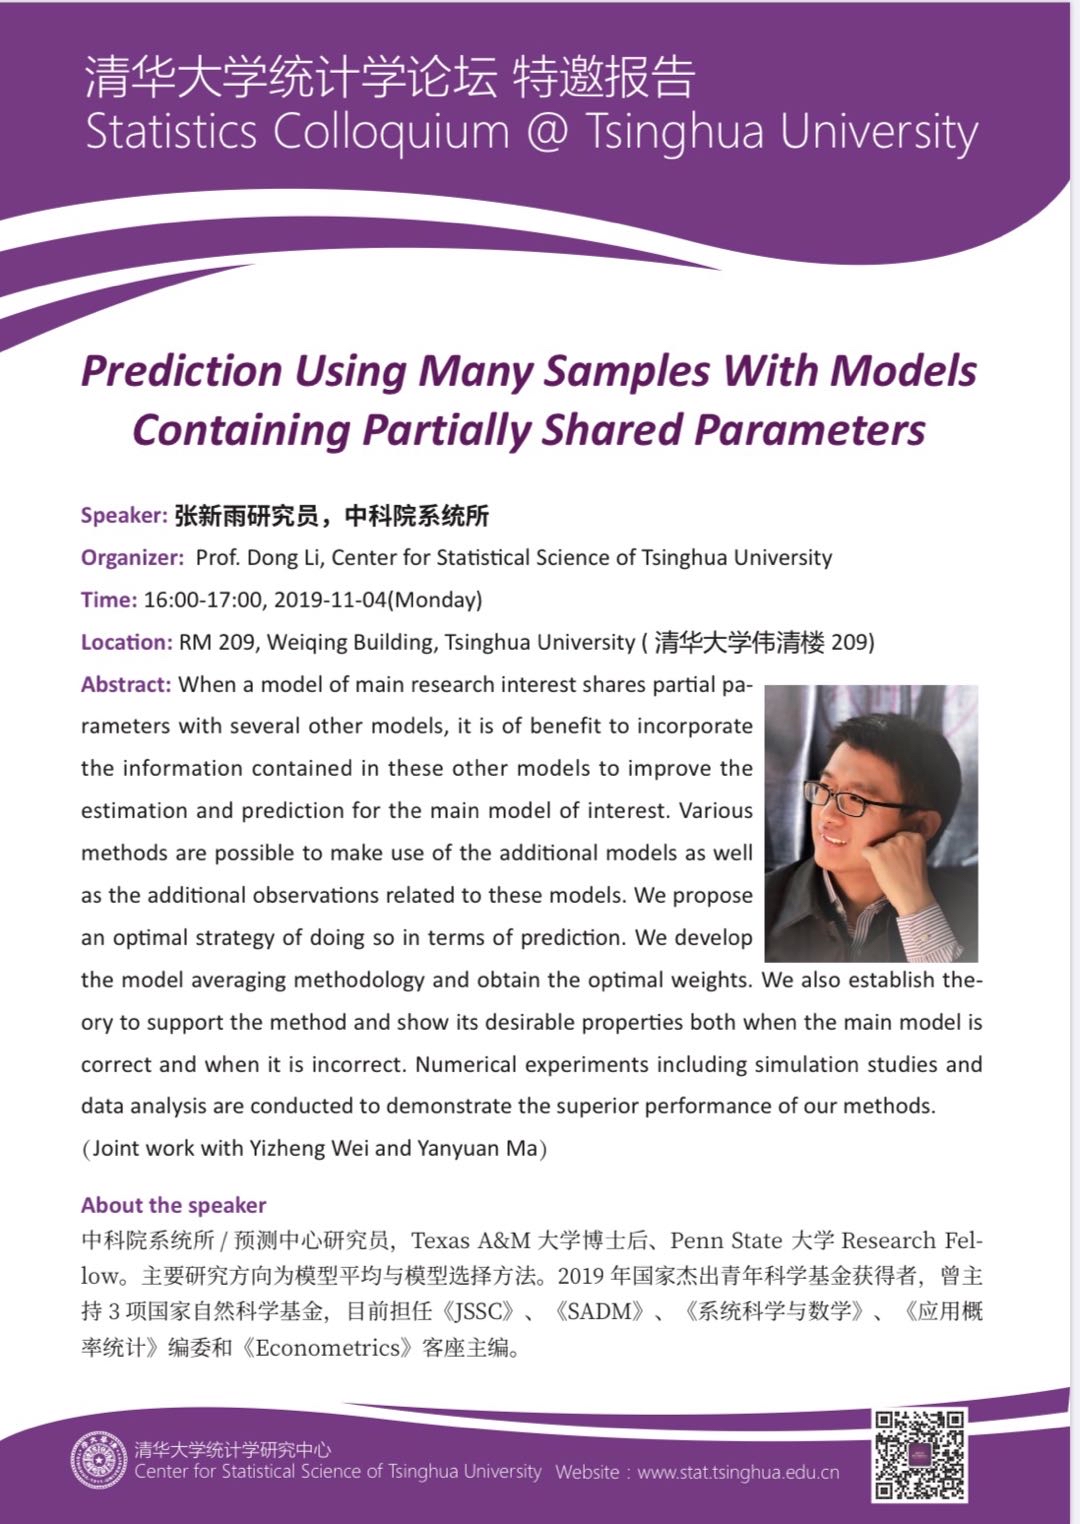 Prediction Using Many Samples with Models Containing Partially Shared Parameters